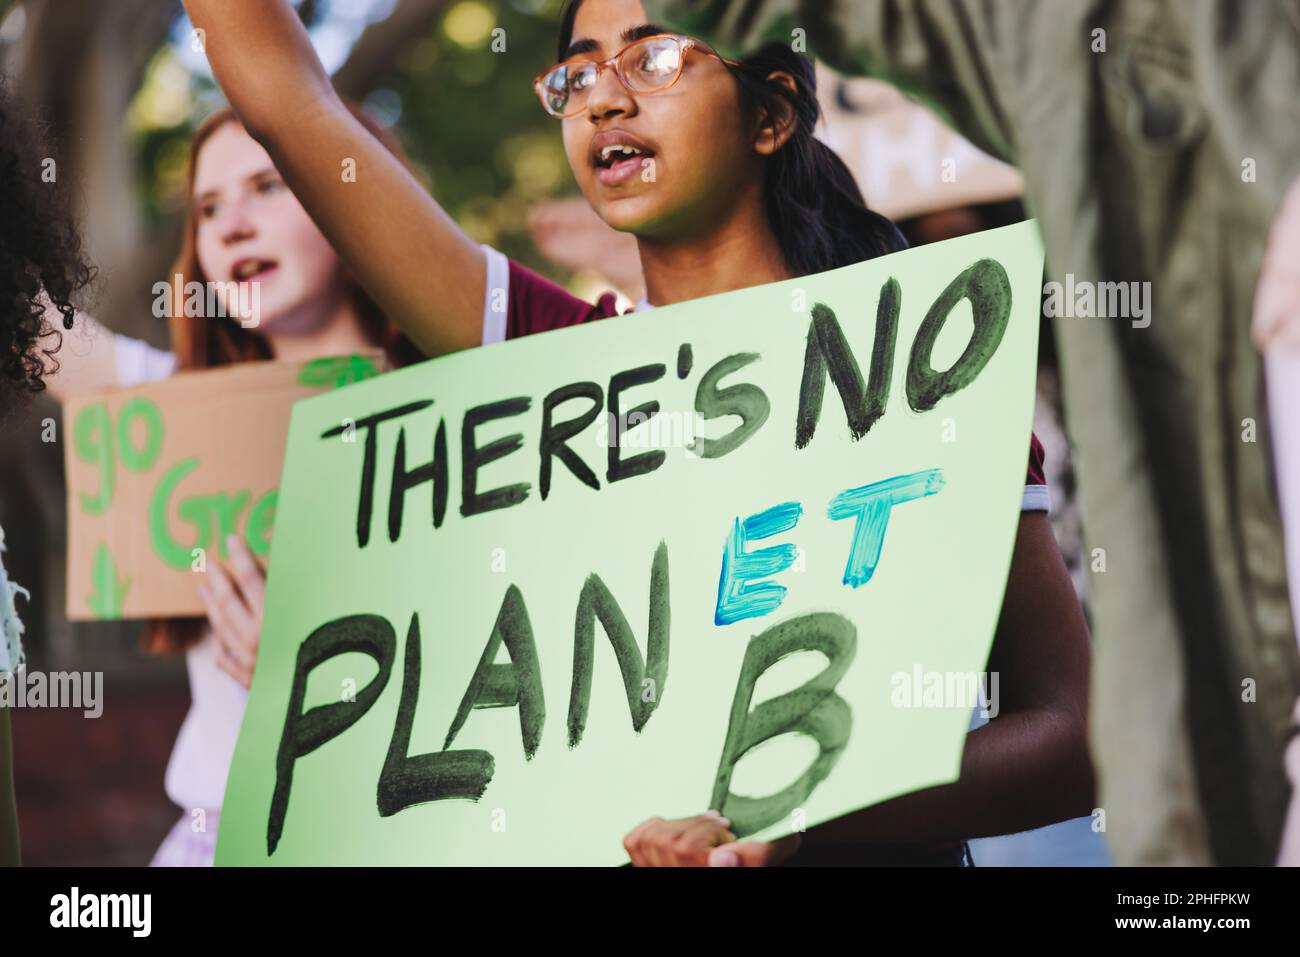 Teenage activists standing up against climate change. Group of multiethnic youth activists marching against global warming and pollution. Diverse youn Stock Photo